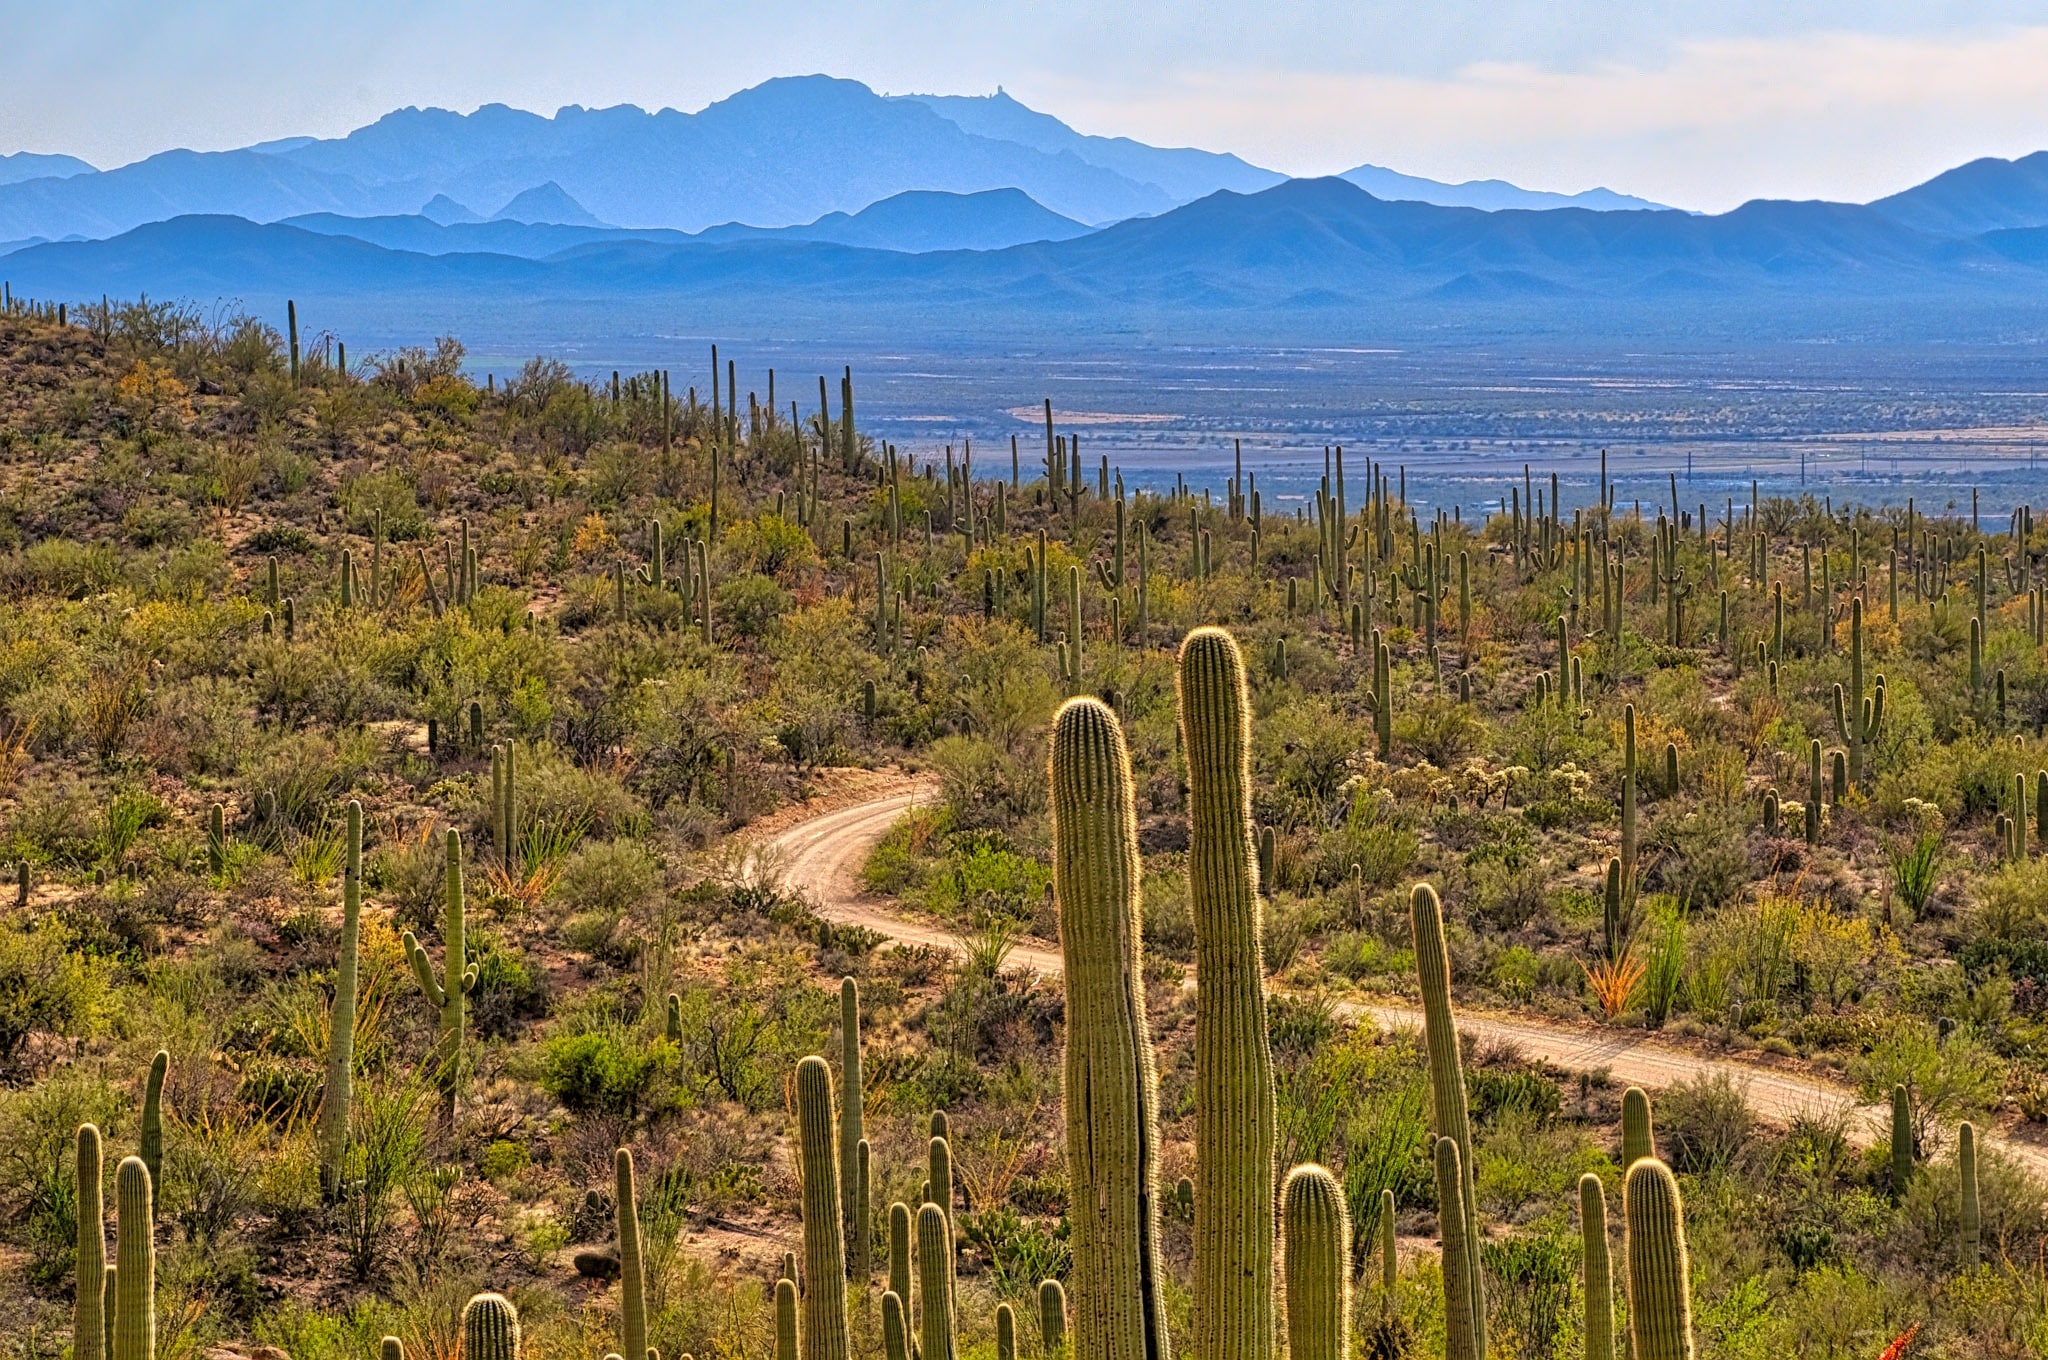 A view from a rise on Hohokam Road in Saguaro National Park near Tucson, Arizona.